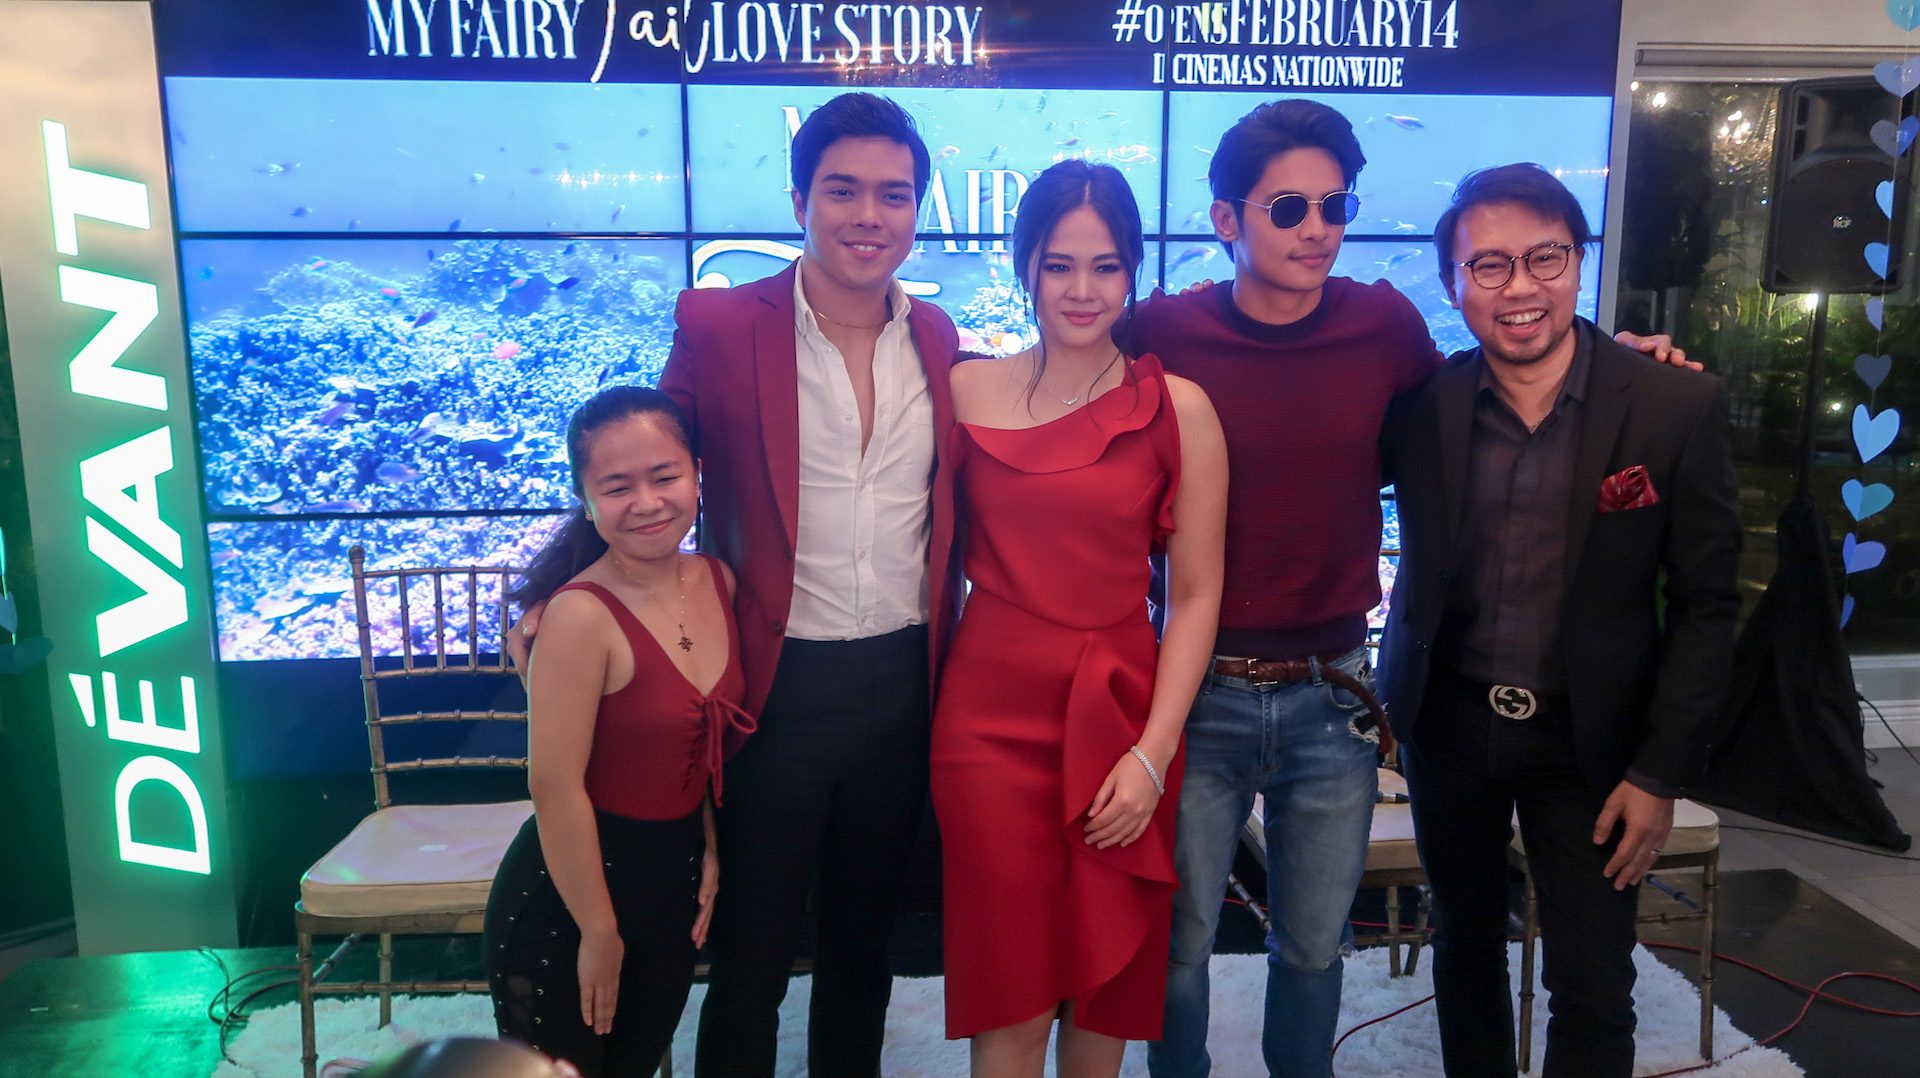 THE CAST. Janella Salvador and Elmo Magalona pose with Kiray Celis, Kiko Estrada, and director Perci Intalan during the press conference of the movie. Photo by Precious del Valle/Rappler 